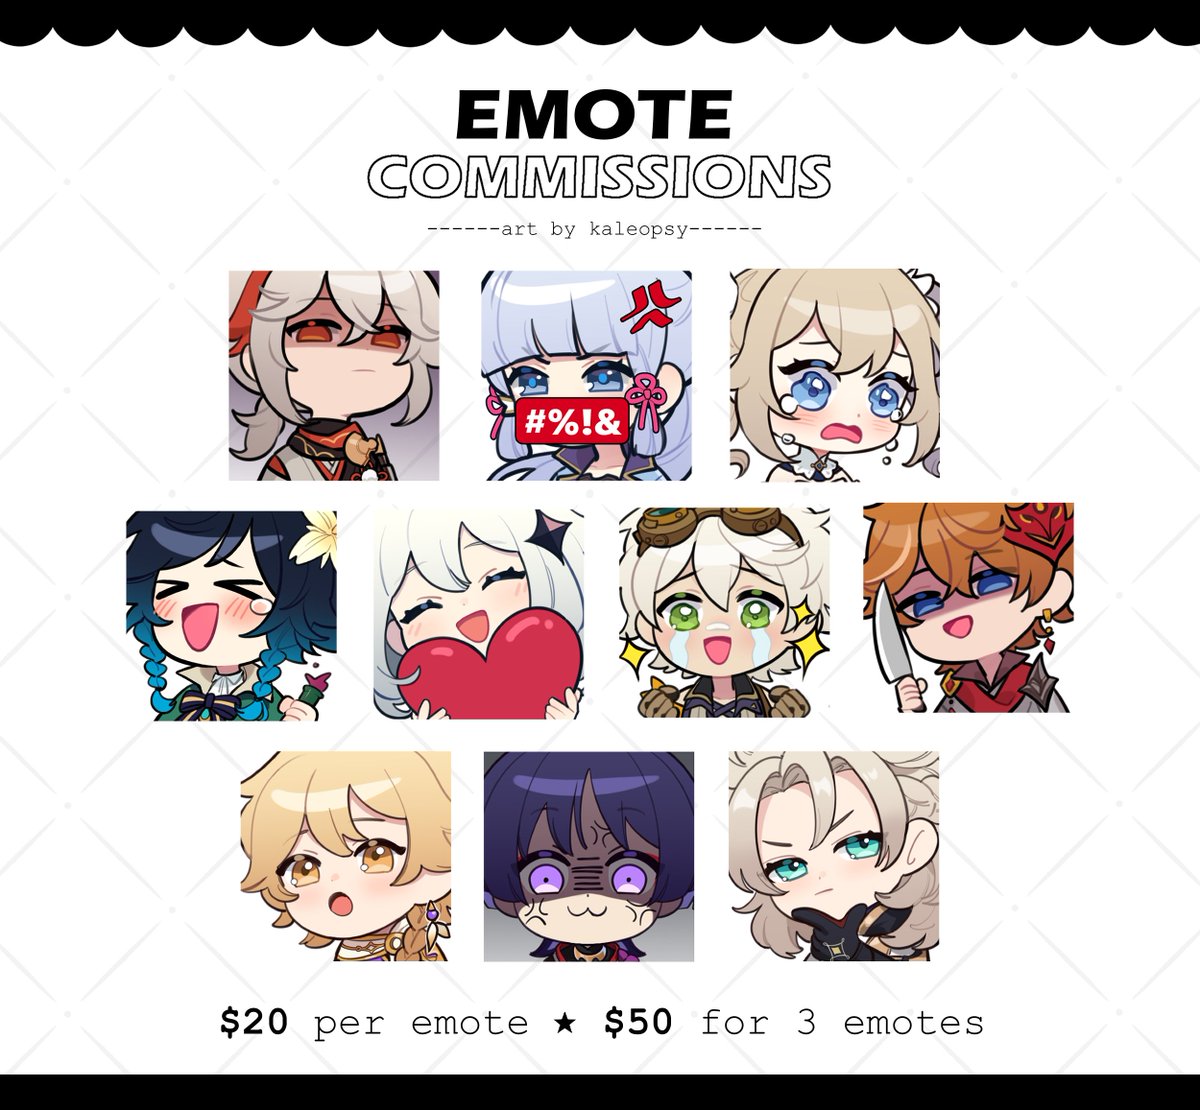 ♦️ Emote comms are open! ♦️
Please visit my carrd for more info https://t.co/GN2T0nOo5l ~

Shares and retweets are very much appreciated! ty! 